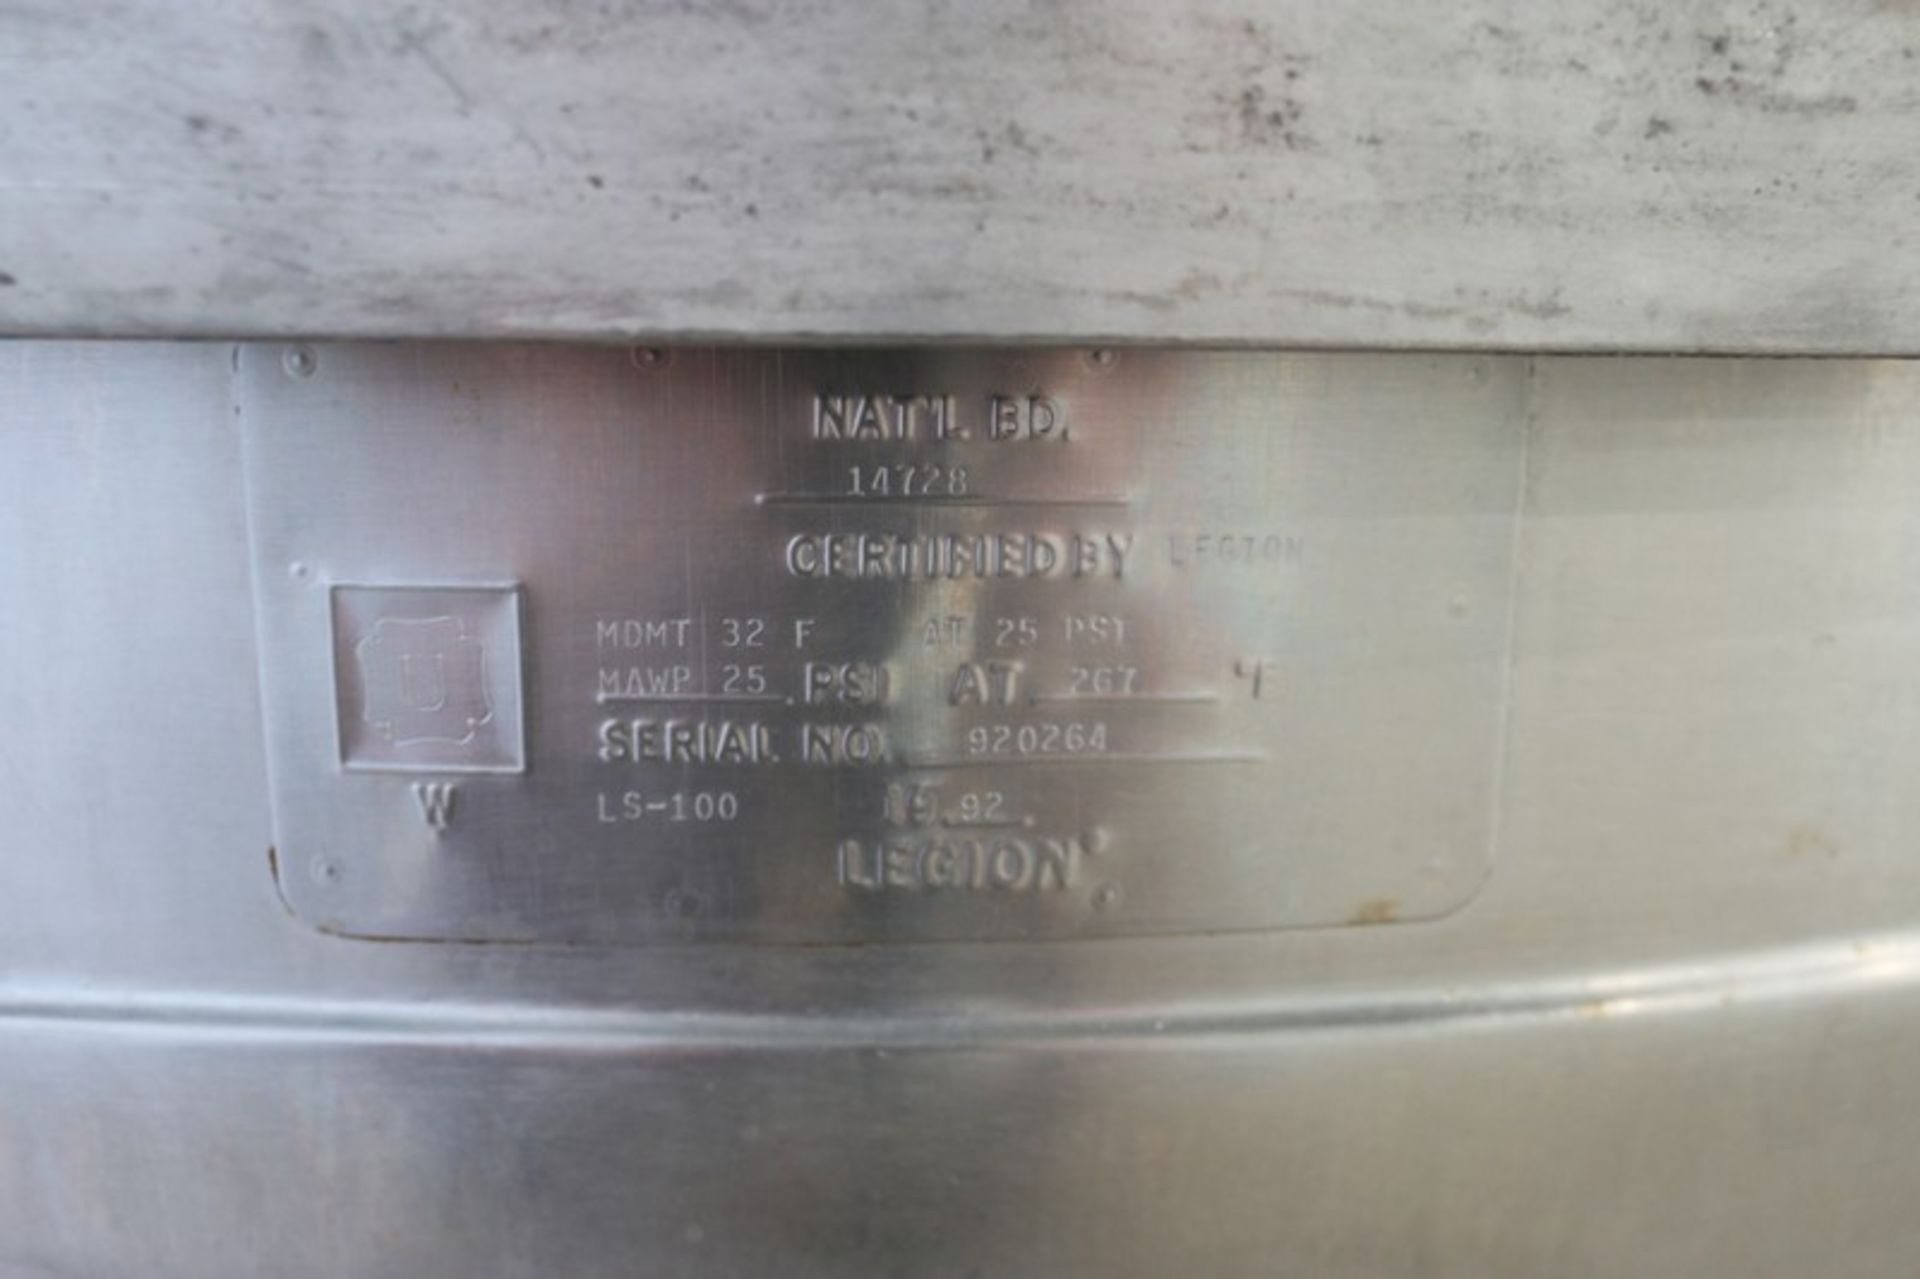 Legion 100 Gal. S/S Kettle,M/N LS-100, S/N 920264, MDMT 32 F @ 25 PSI, MAWP 25 PSI @ 267 F, with 1- - Image 5 of 10